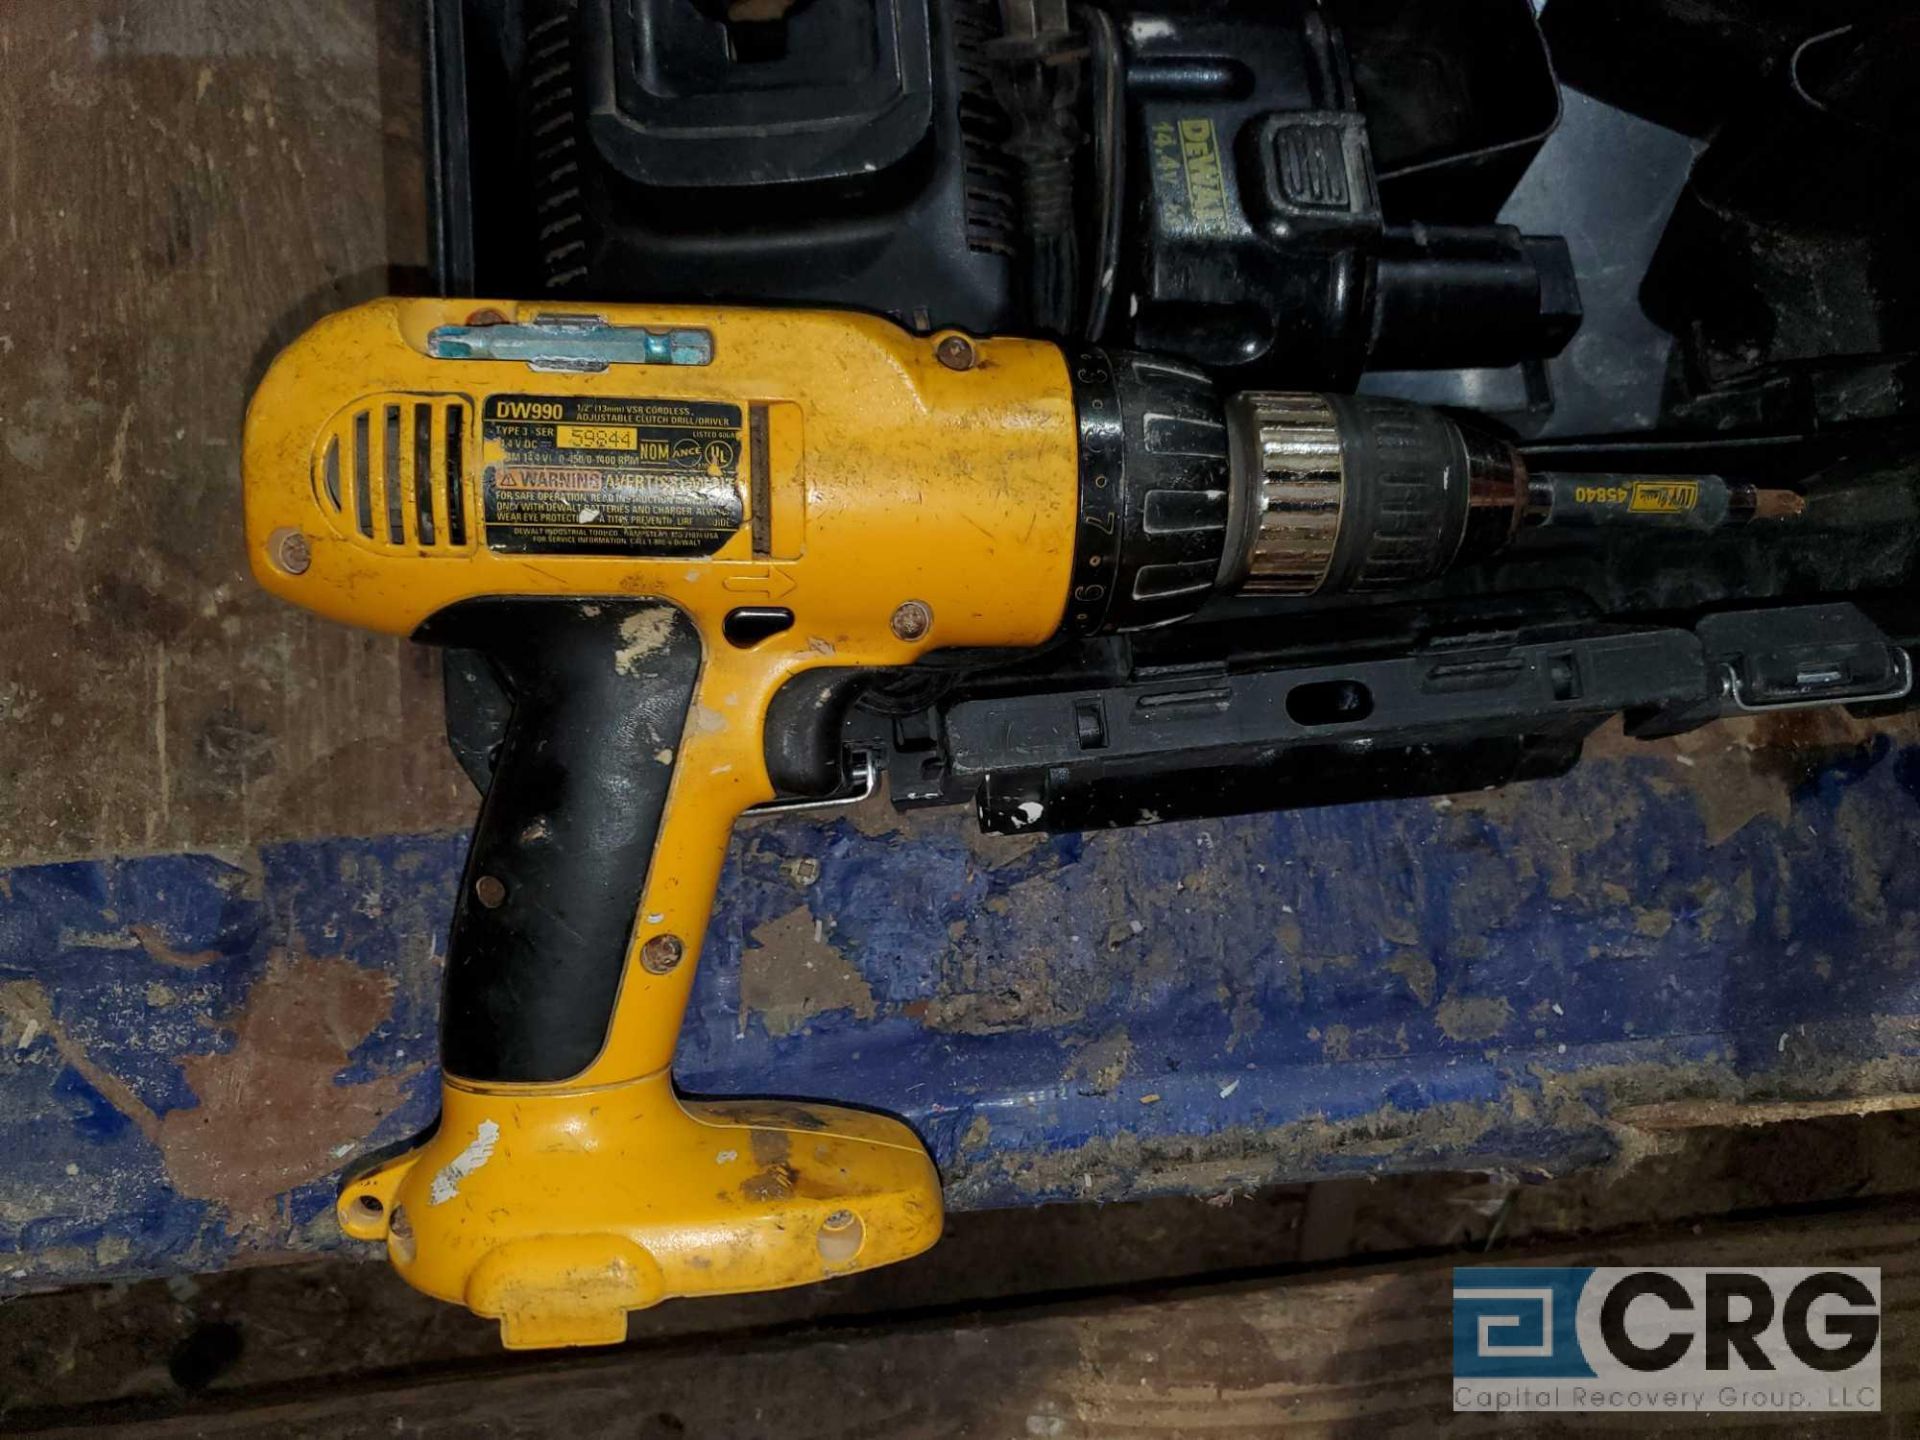 Lot consists of (1) DeWalt 14.4 volts cordless drill, DW990, 1/2 in. drive and (1) ECHO gas - Image 2 of 3